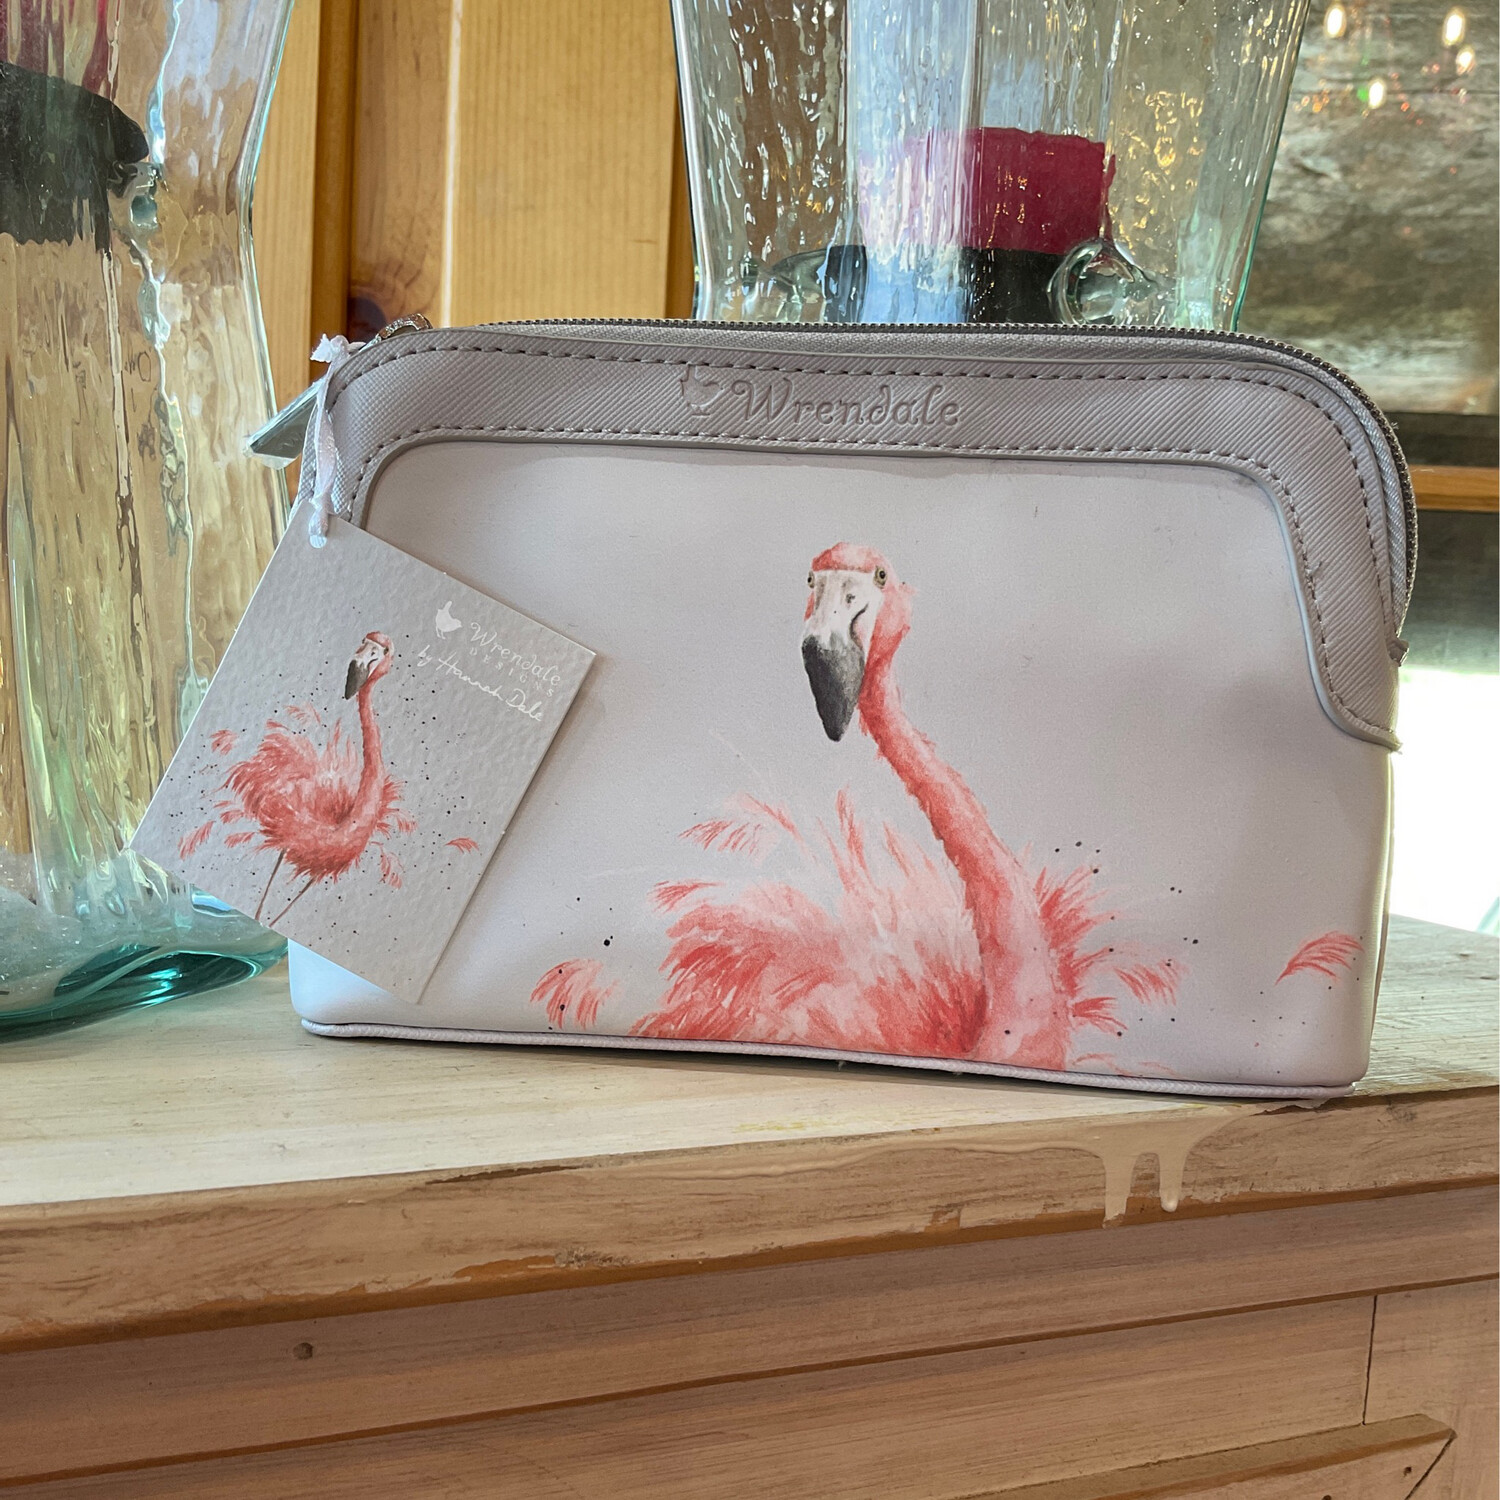 Wrendale  CMB005 Small Cosmetic Bags 